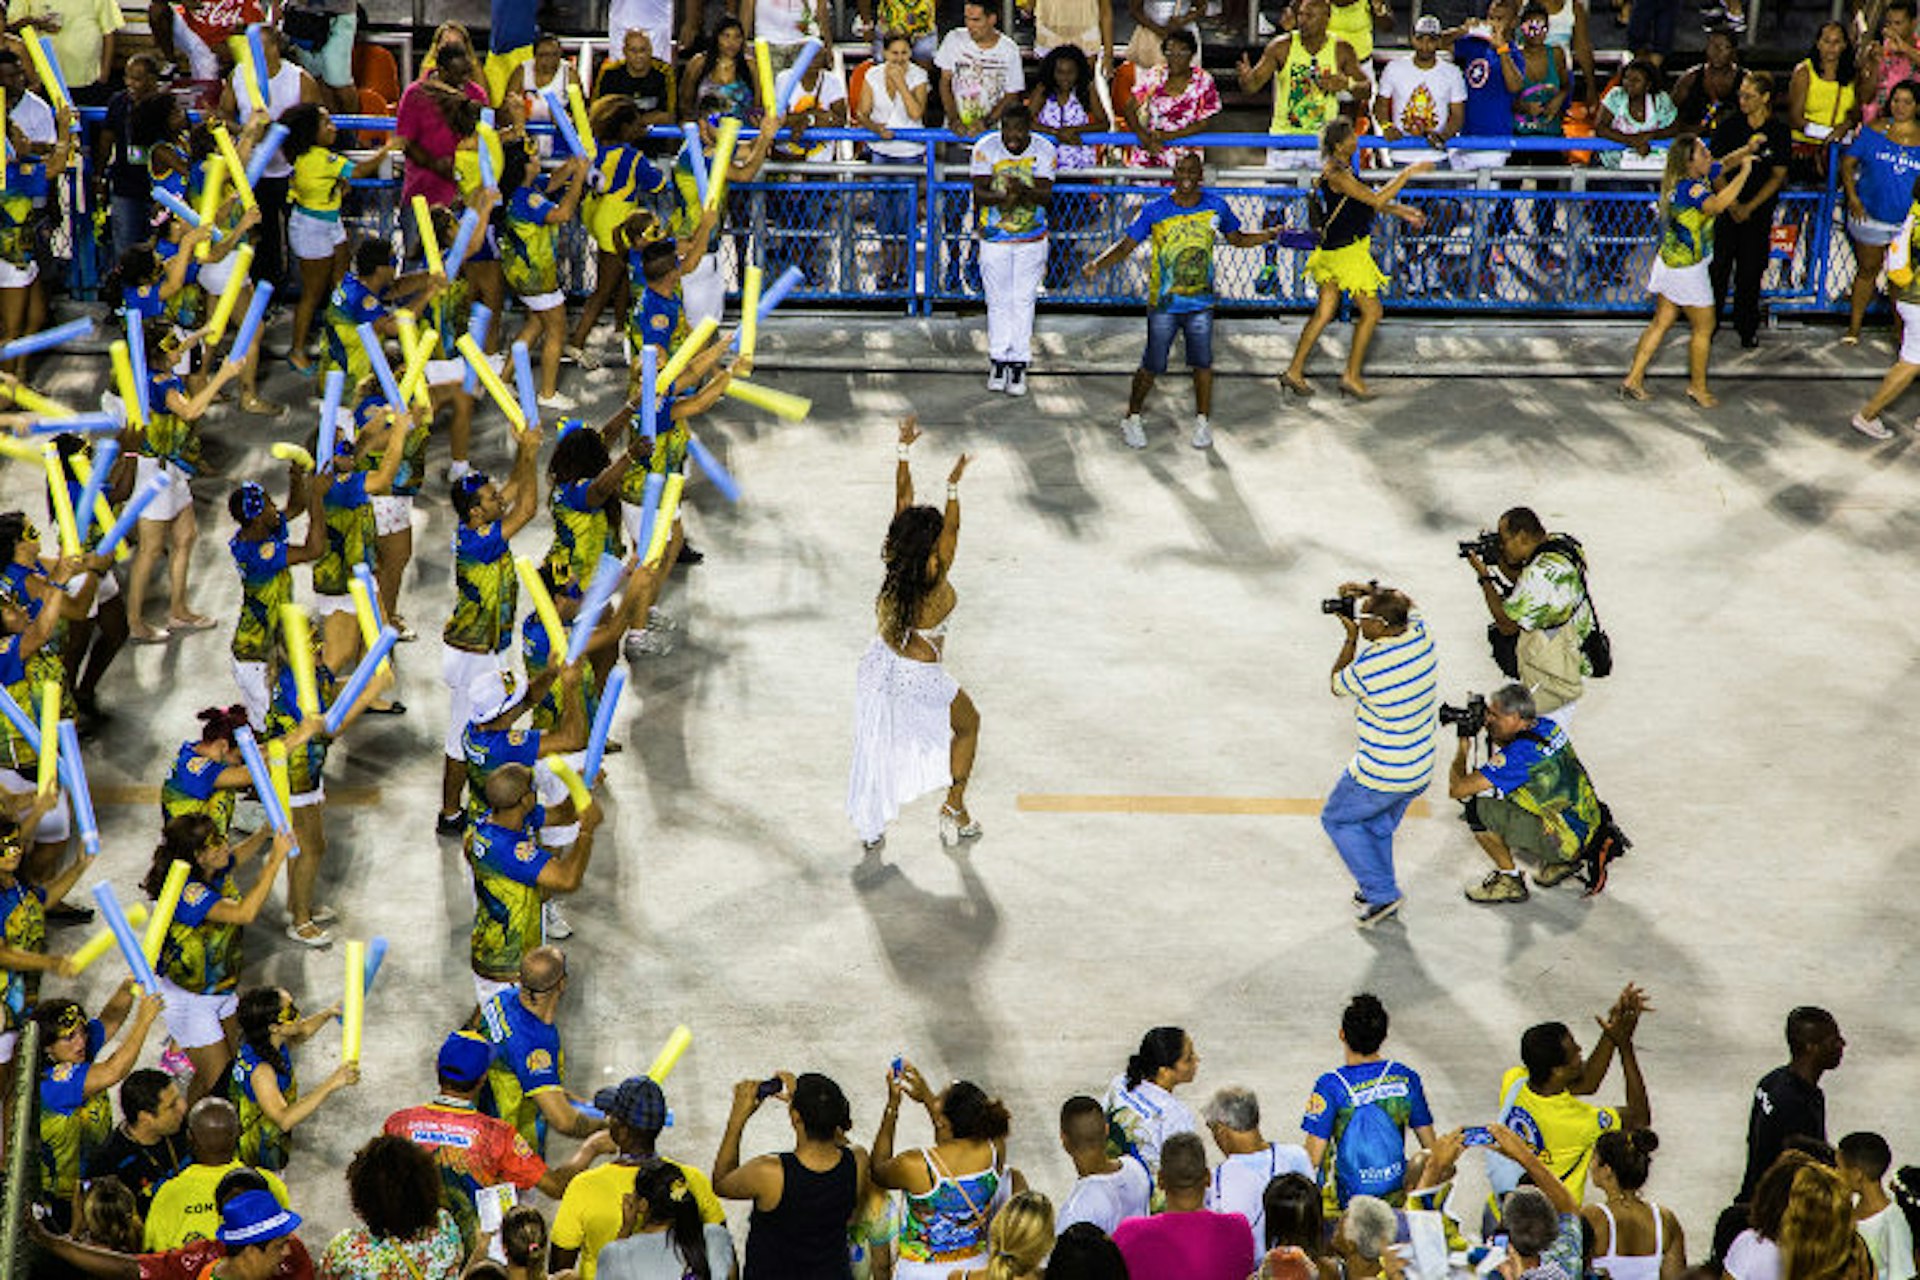 One of the samba schools shows off their skills. Image by Teresa Geer / Lonely Planet